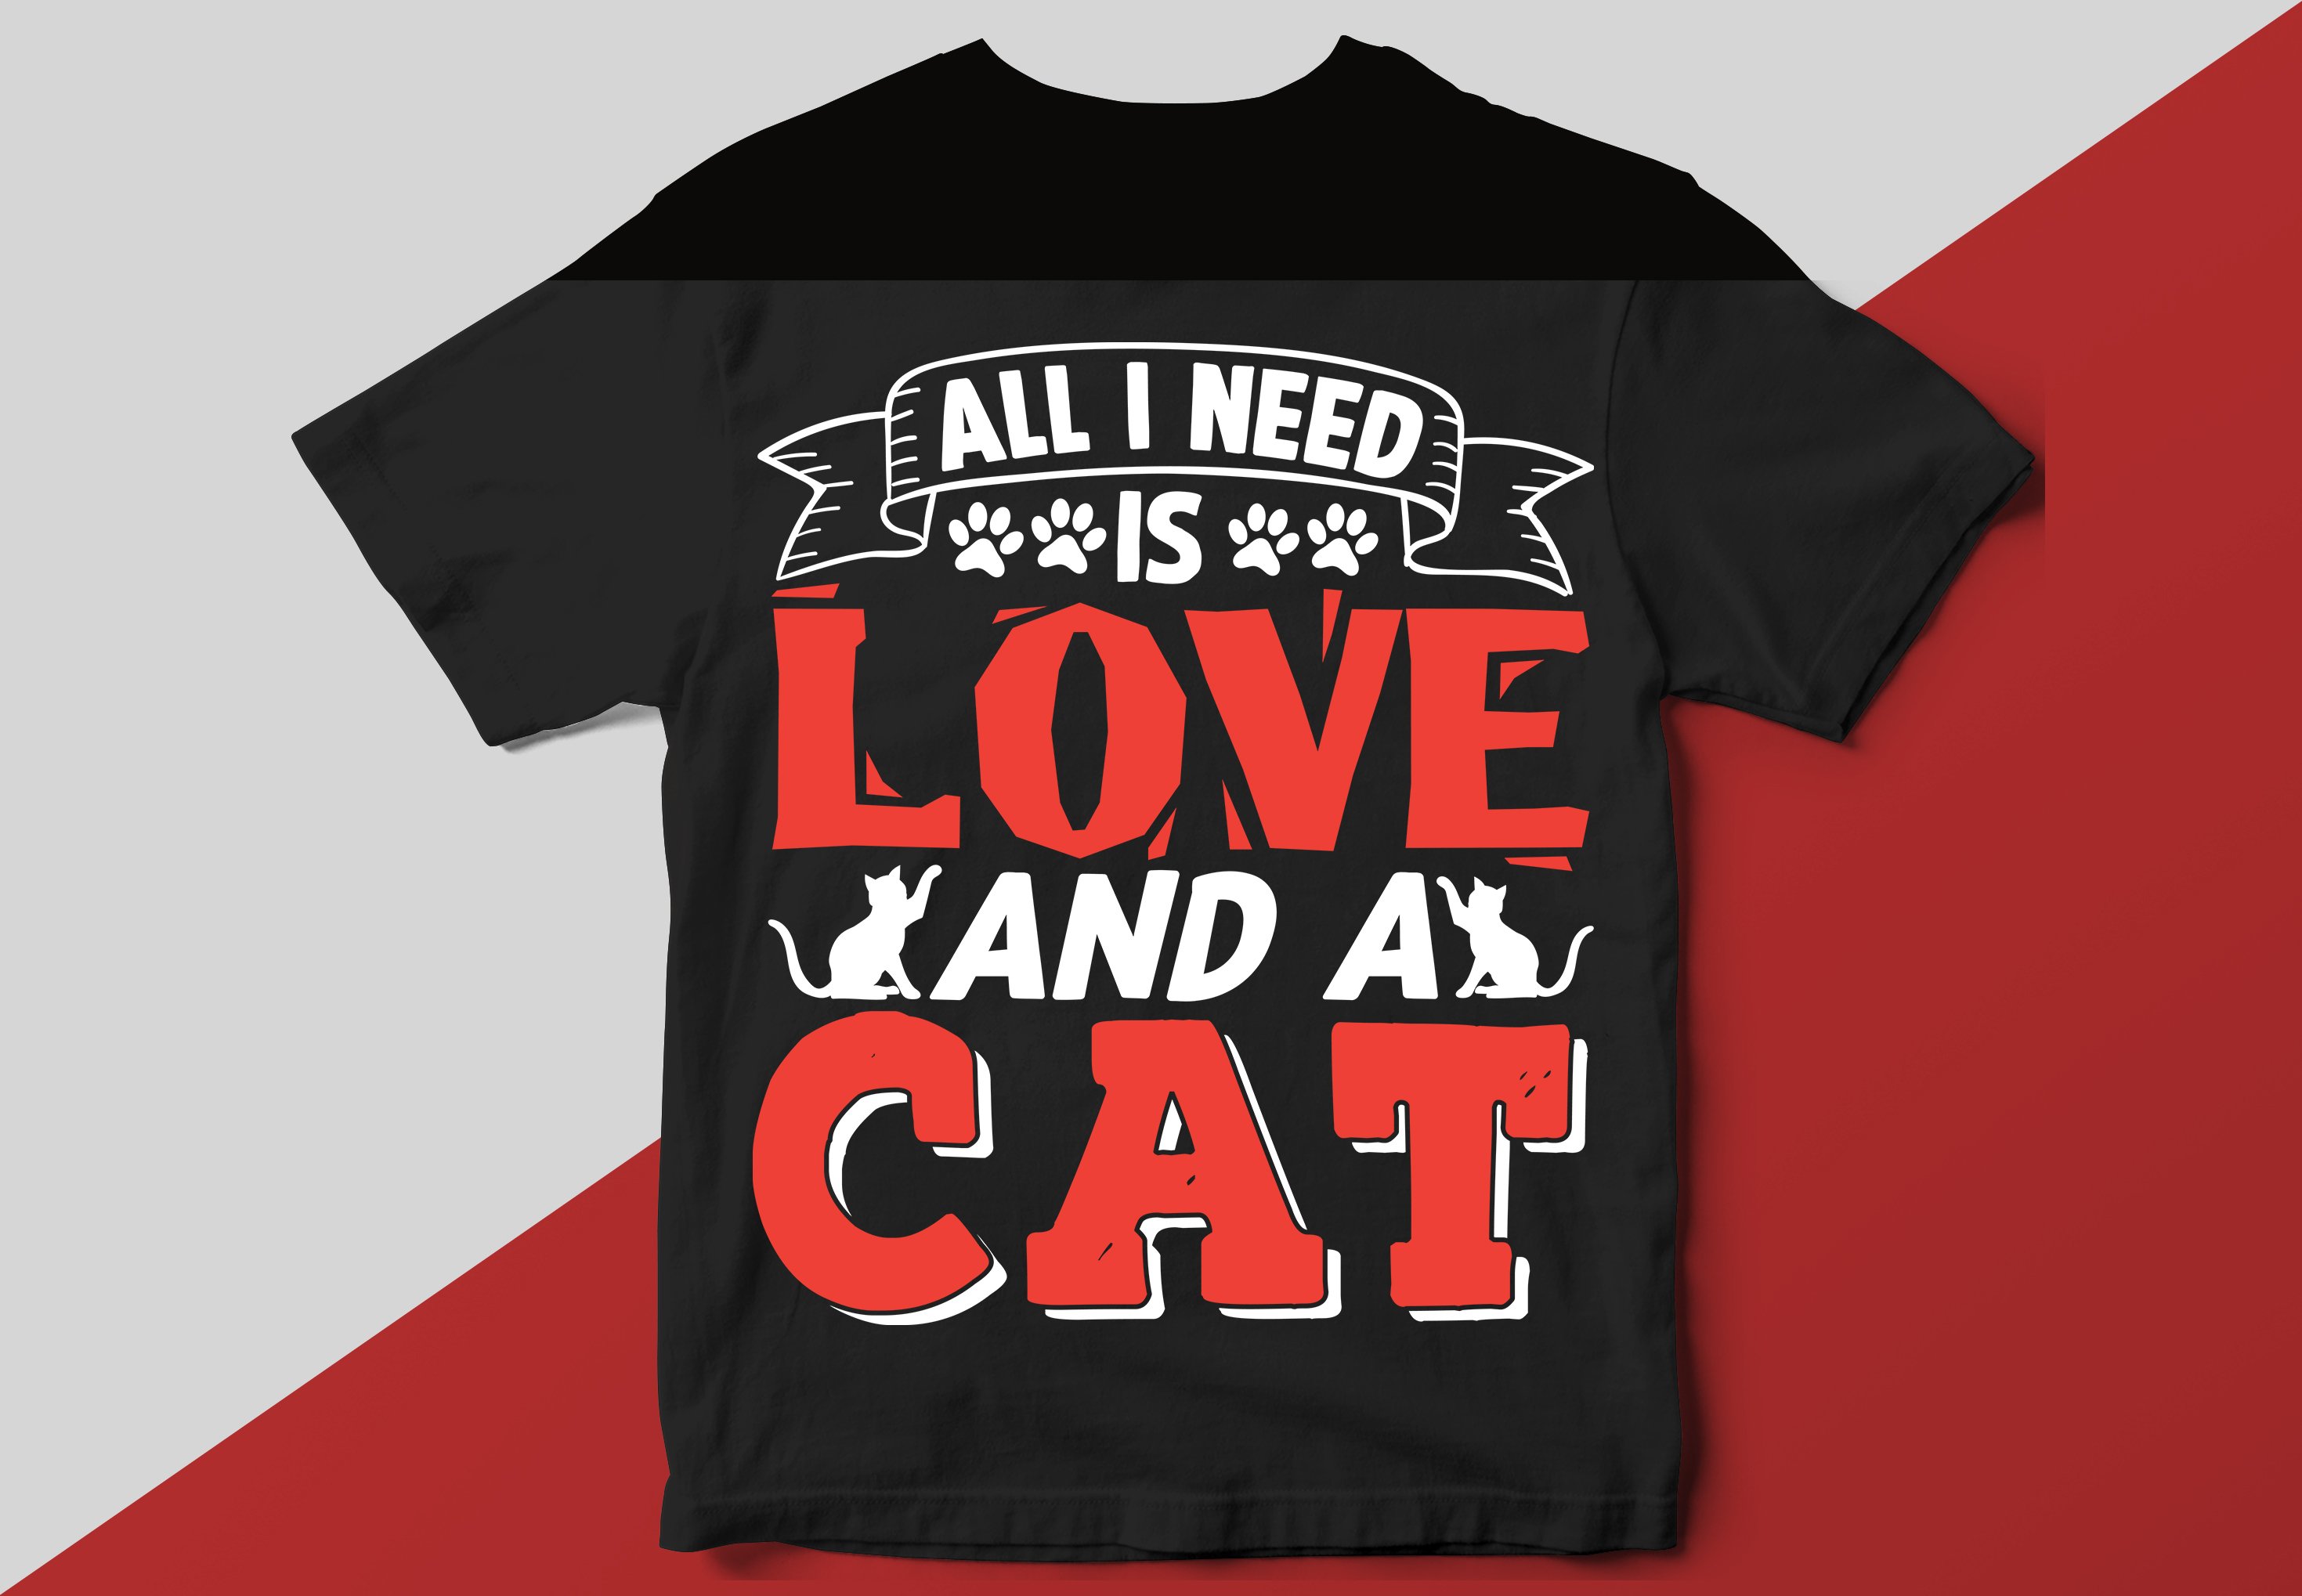 All you need is love and a cat.